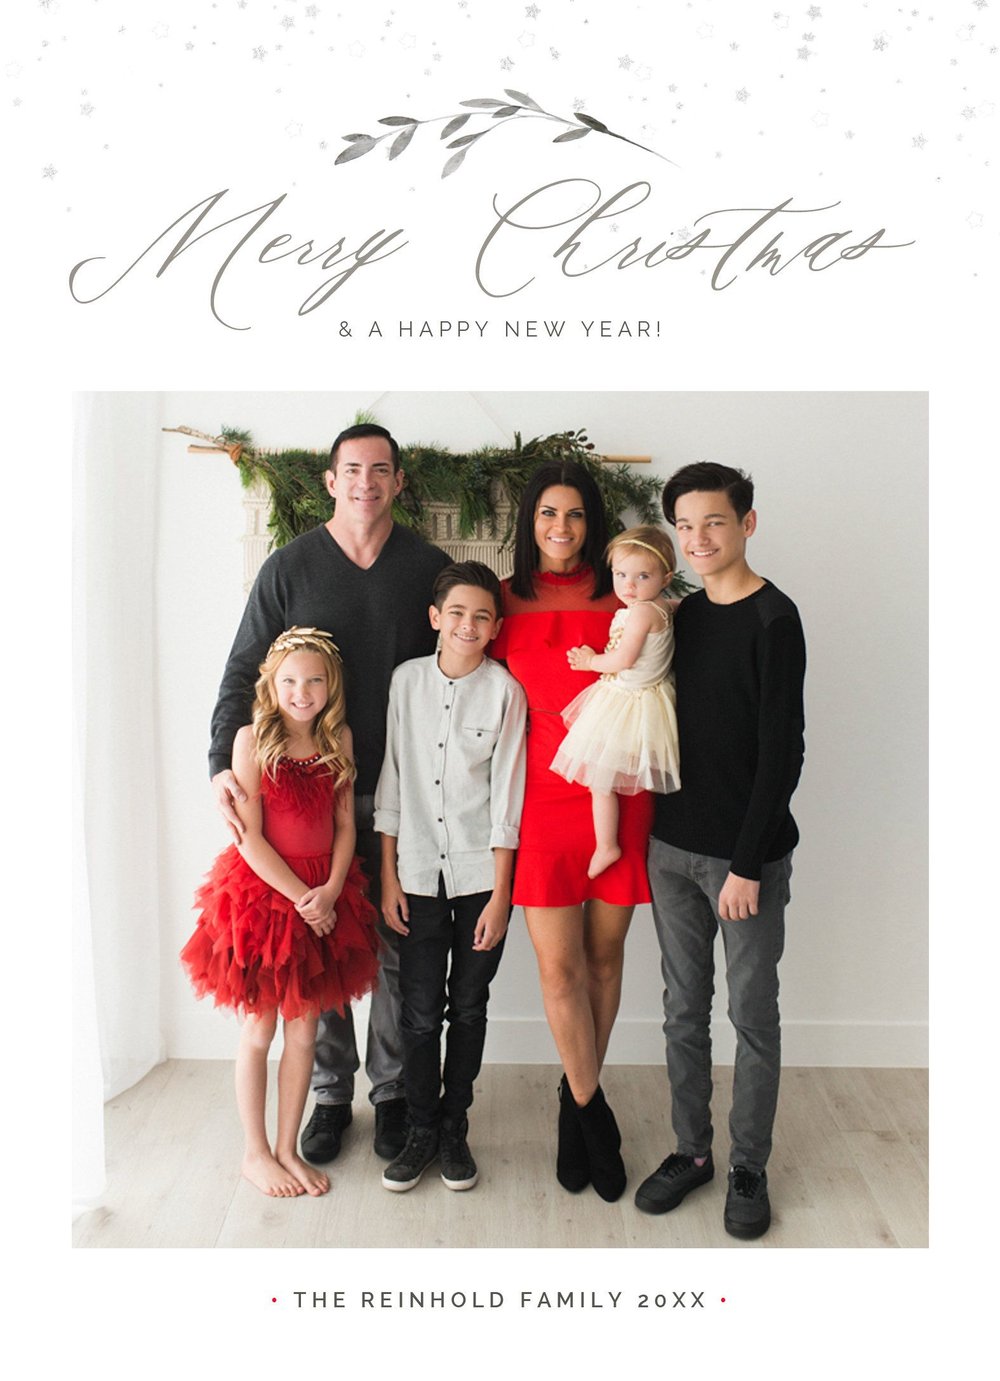 Christmas Card Template, Watercolor Merry Christmas Photo Card Template, Photoshop Template, INSTANT DOWNLOAD!.jpg